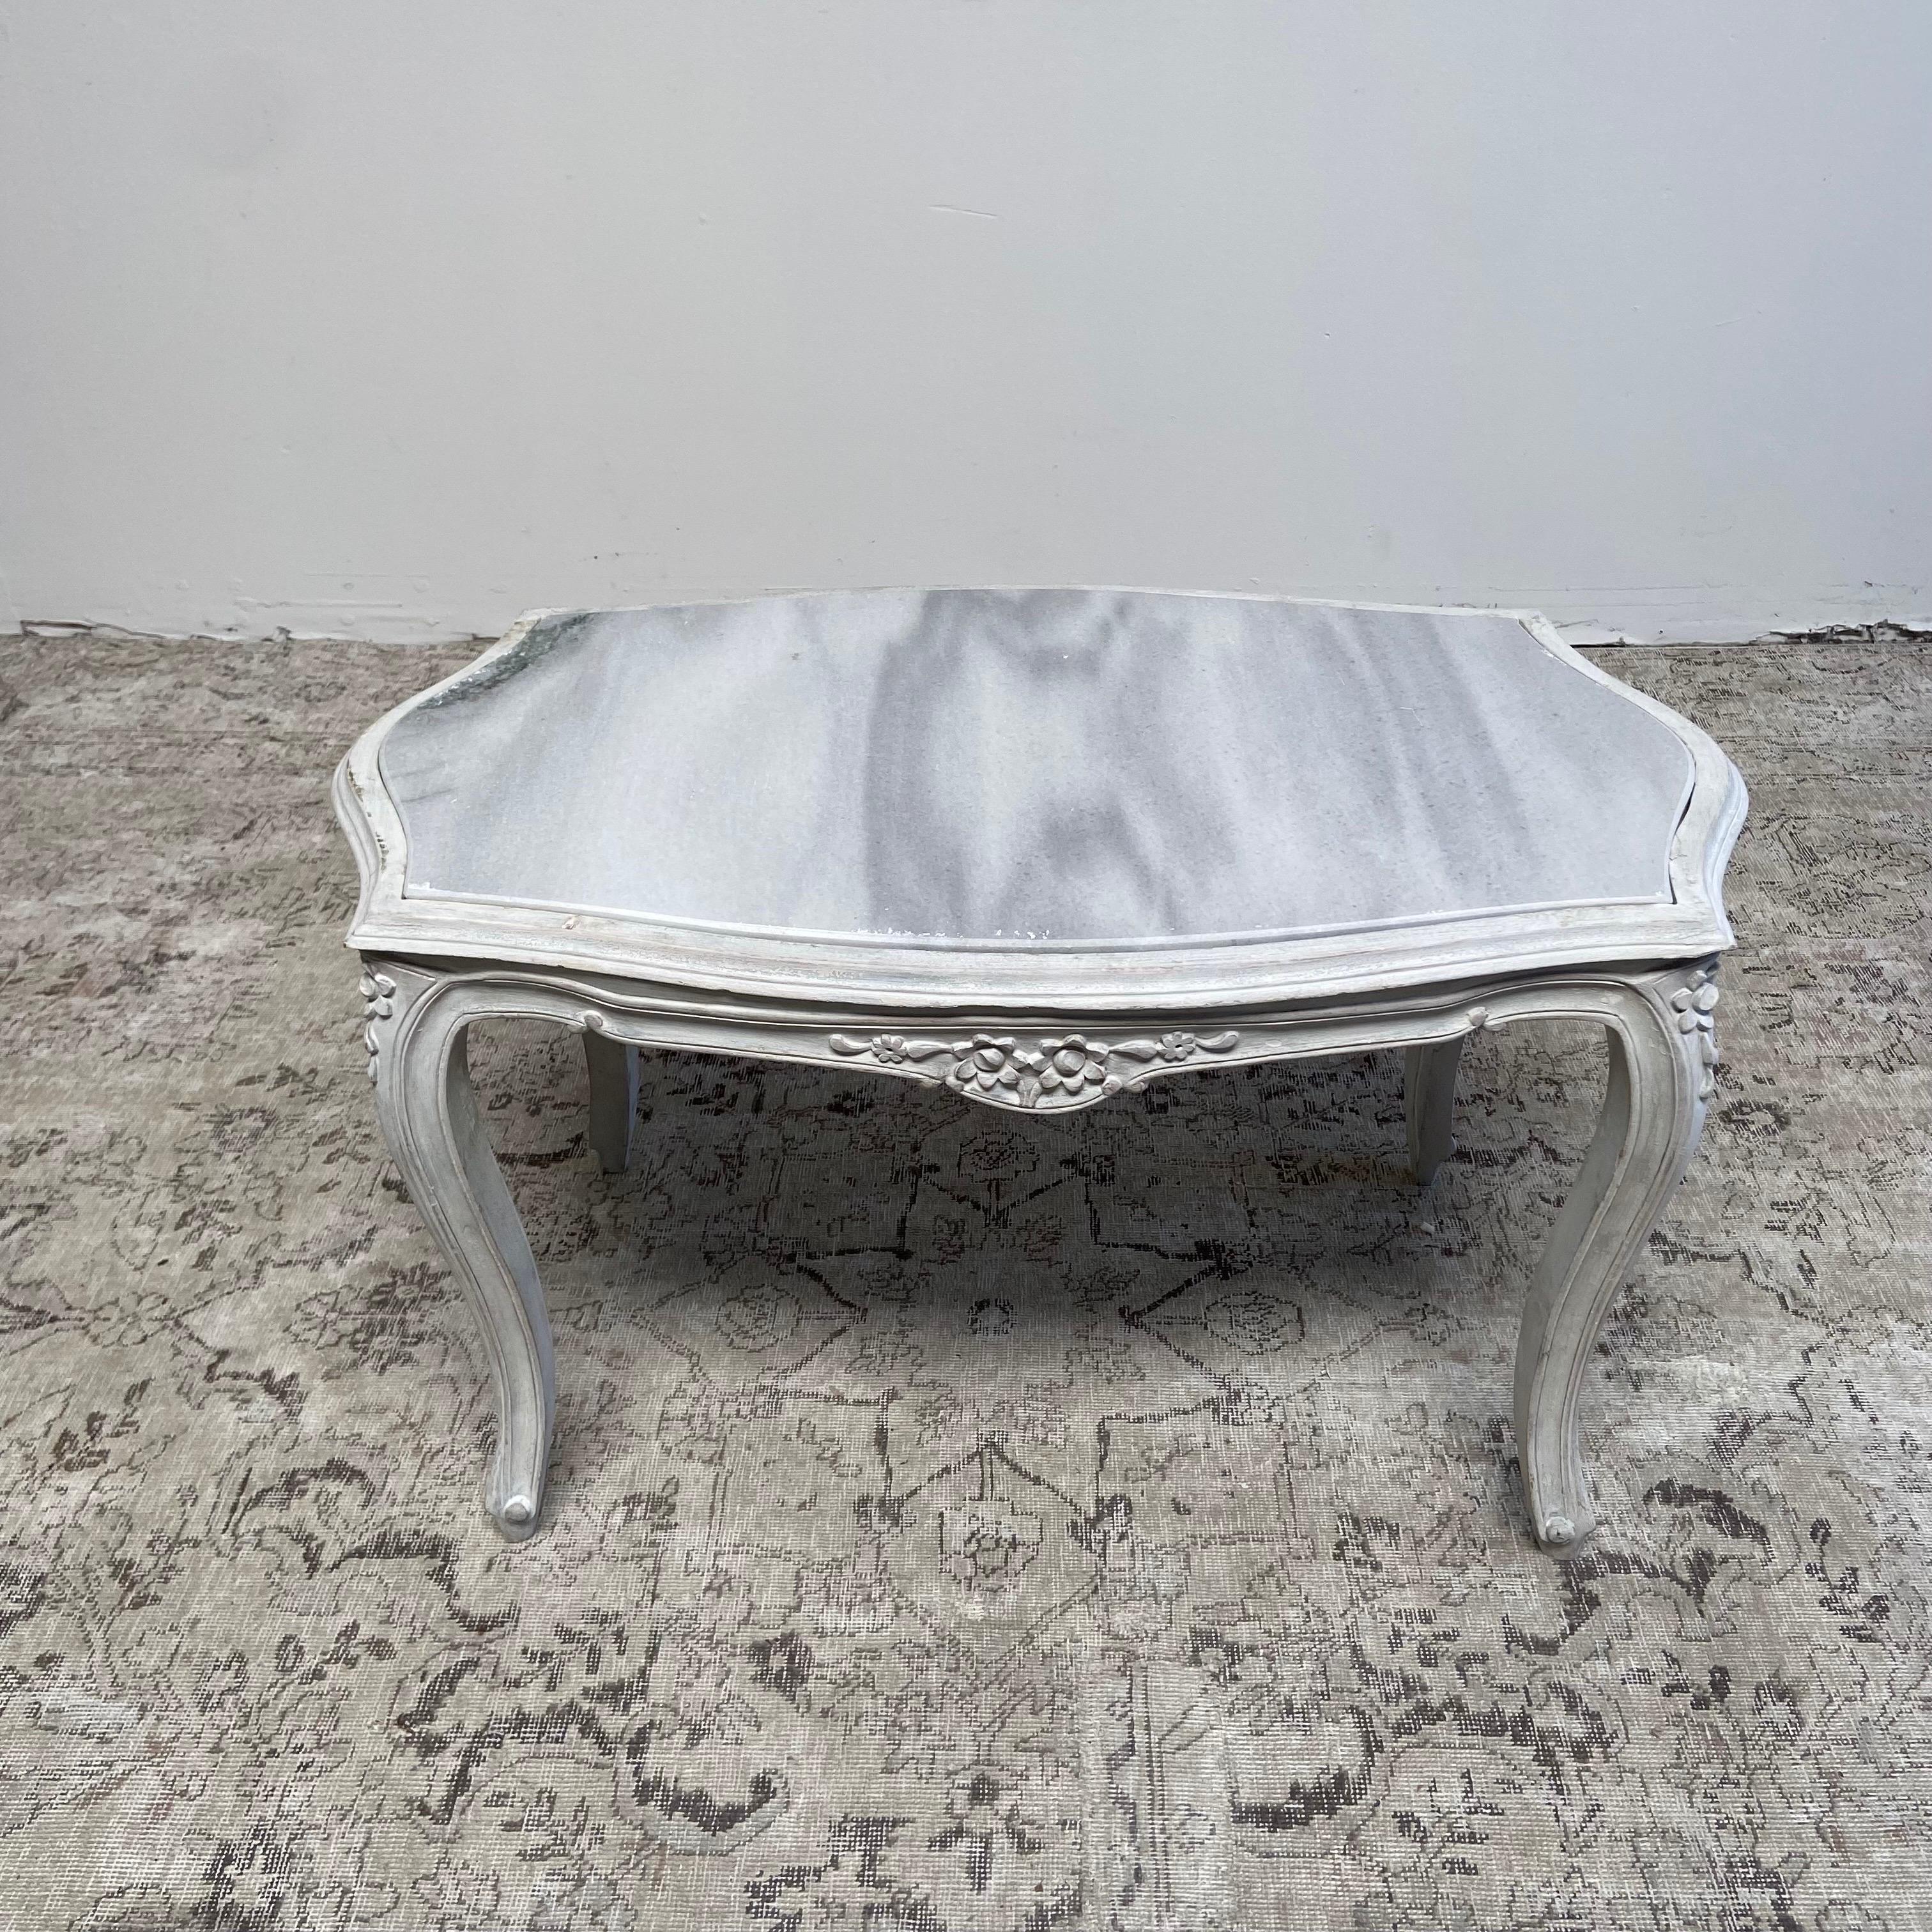 Vintage Marble top coffee table 38”w x 24”d x 22”h
Painted in a french gray color with subtle distressed edges, and antique patina.
Solid and sturdy, can be used on an everyday basis.
The marble top rests on the base, and is not attached.
If you